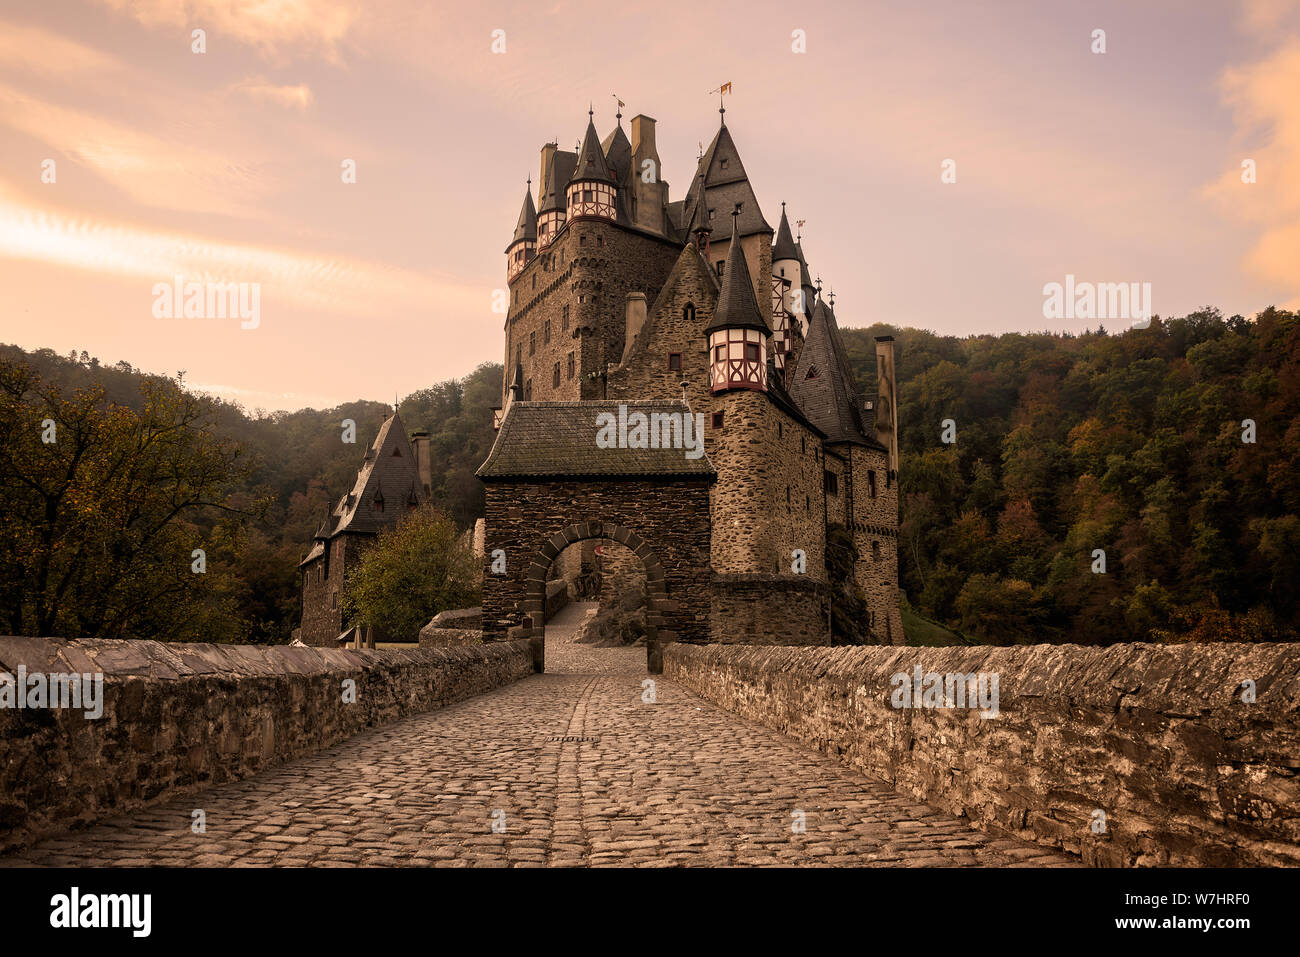 Cobblestone street with arch towards the medieval Burg Eltz Castle at sunrise near Mosel river in Wierschem, Rhineland-Palatinate, Germany. Stock Photo